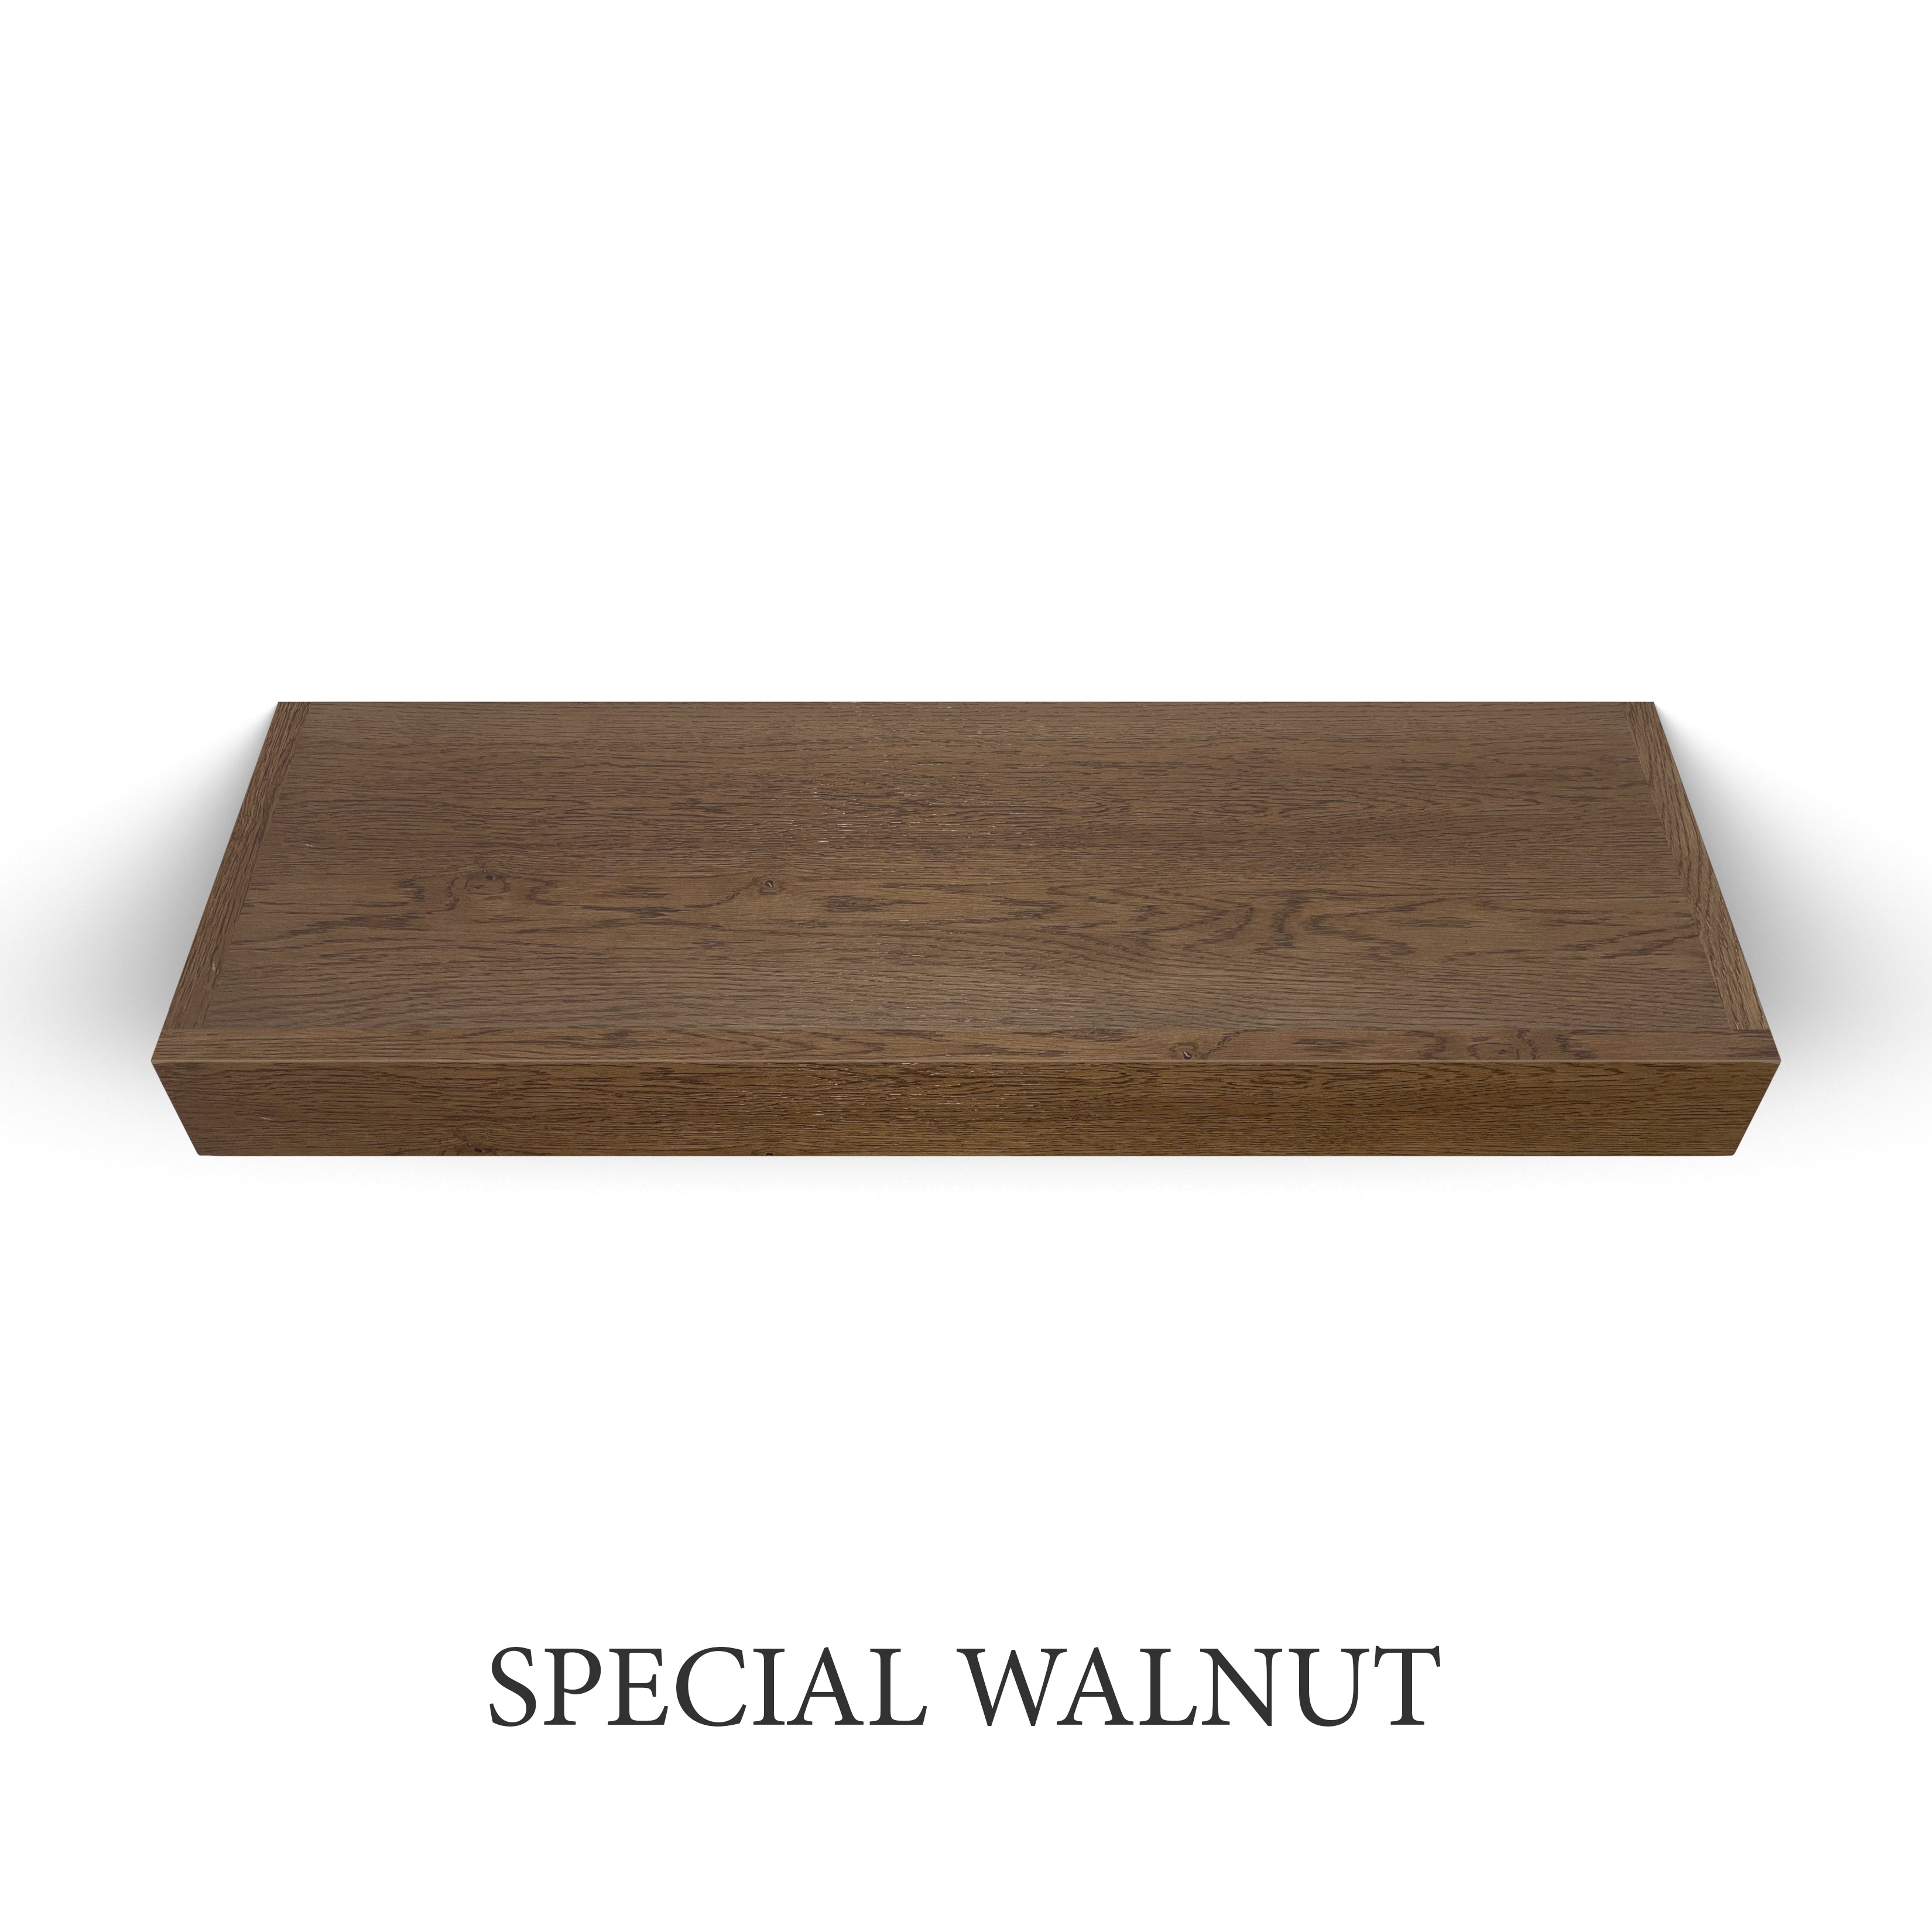 special walnut White Oak 3 Inch Thick LED Lighted Floating Shelf - Battery